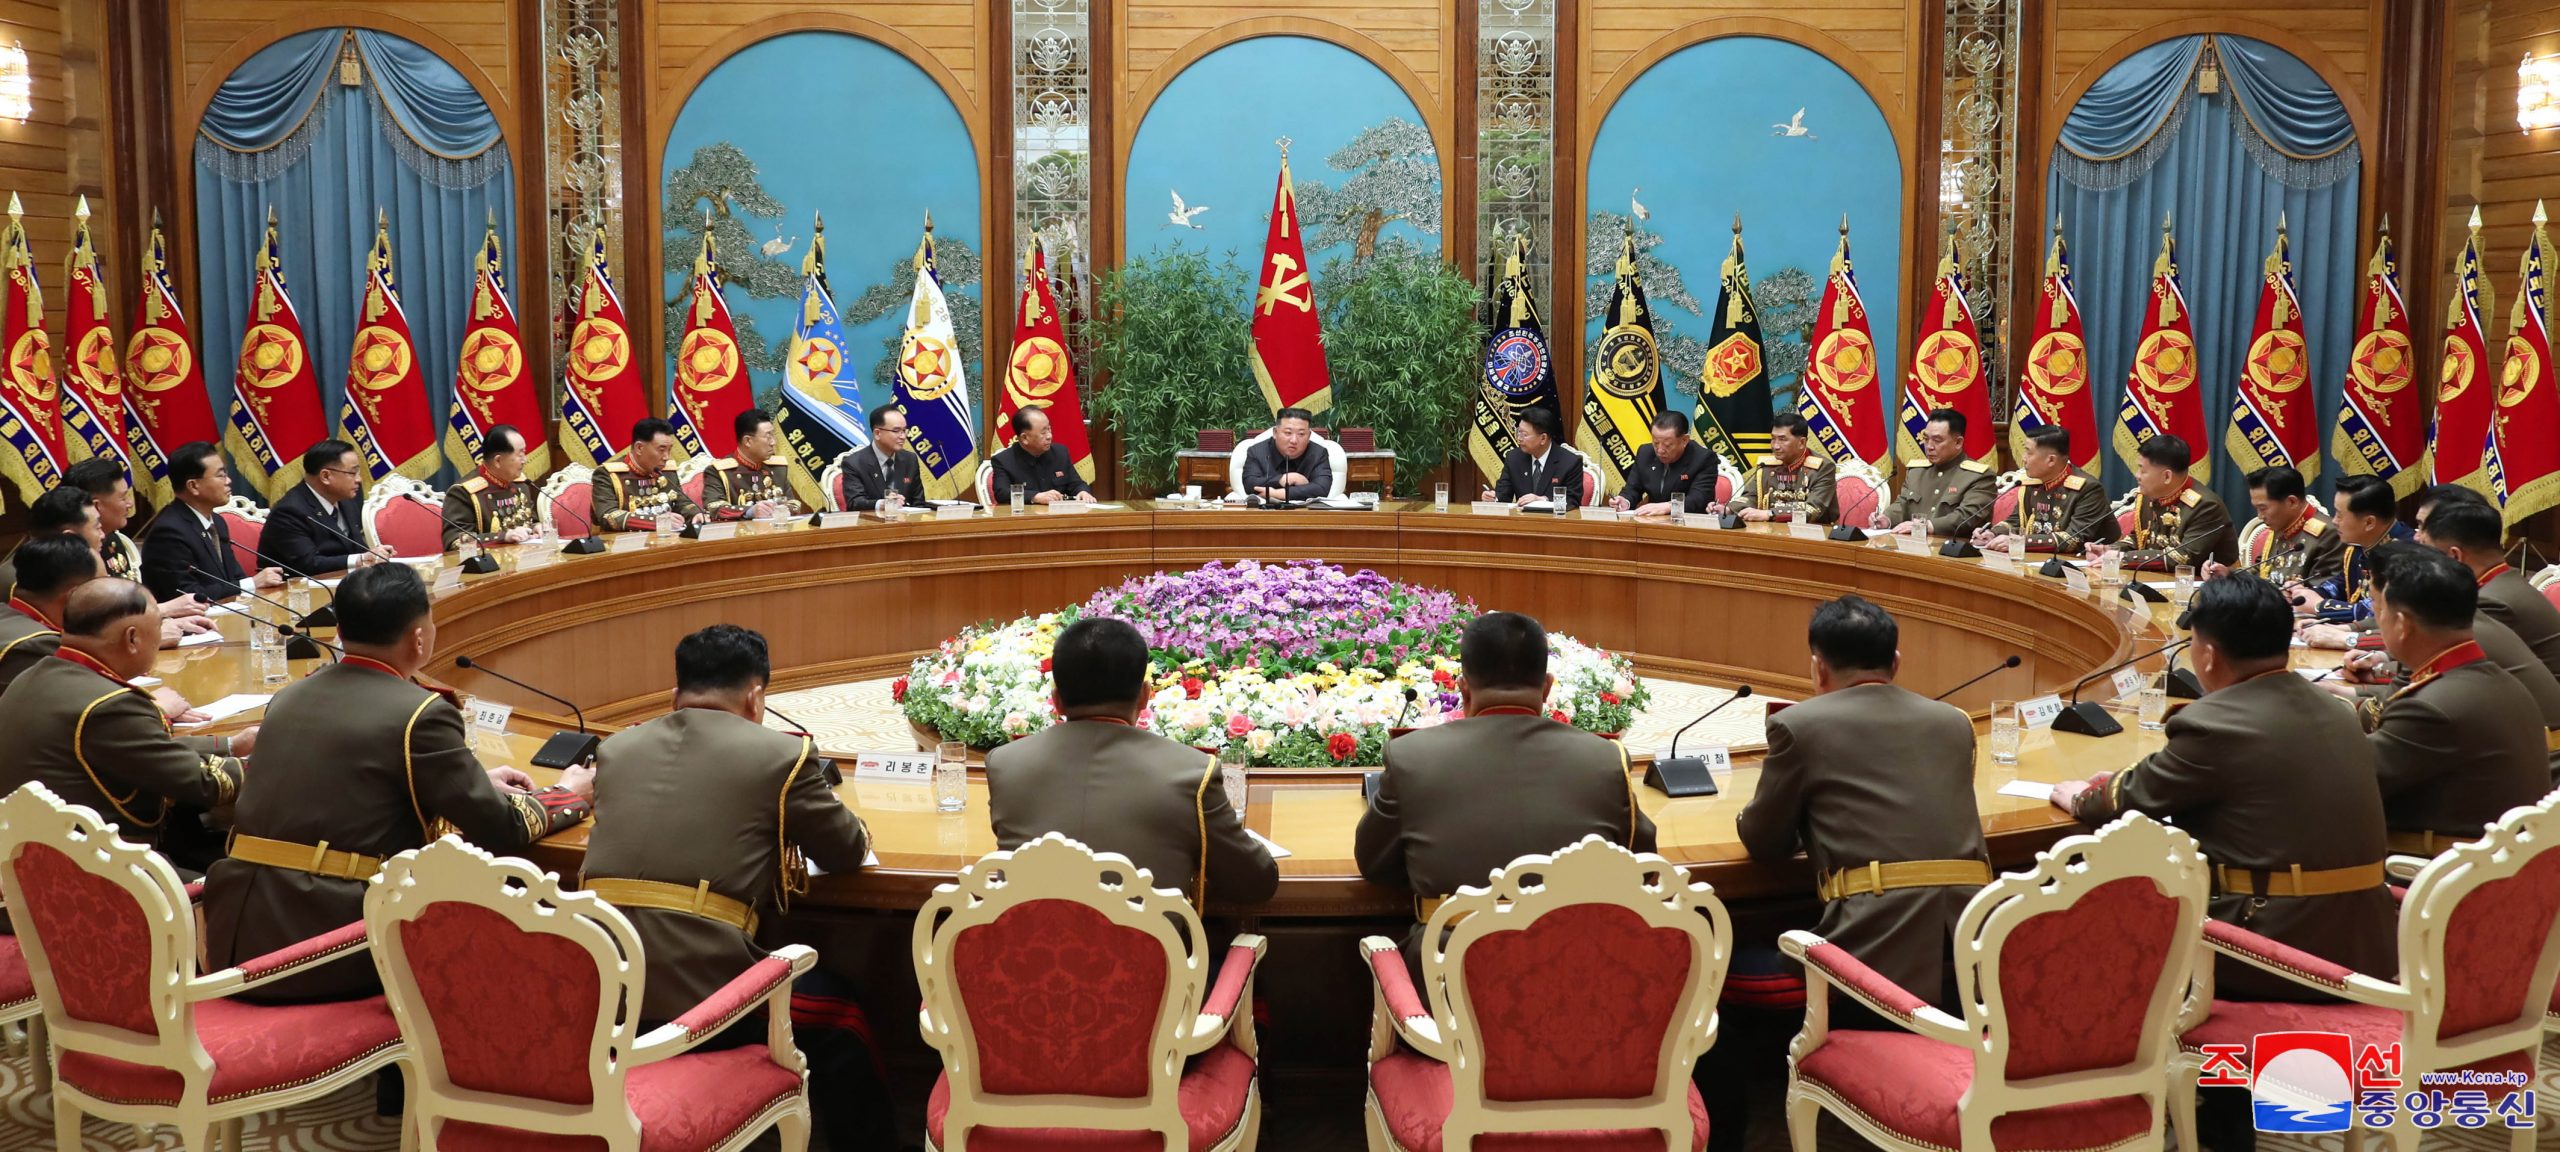 epa10451776 A photo released by the official North Korean Central News Agency (KCNA) shows North Korean leader Kim Jong-un (C) speaking during an enlarged meeting of the Central Military Commission of the Workers' Party of Korea at the office of the party's Central Committee in Pyongyang, North Korea, 06 February 2023 (issued 07 February 2023). According to KCNA, the meeting 'discussed in depth major military and political tasks for 2023' and the 'long-term issues concerning the orientation for army building'.  EPA/KCNA   EDITORIAL USE ONLY